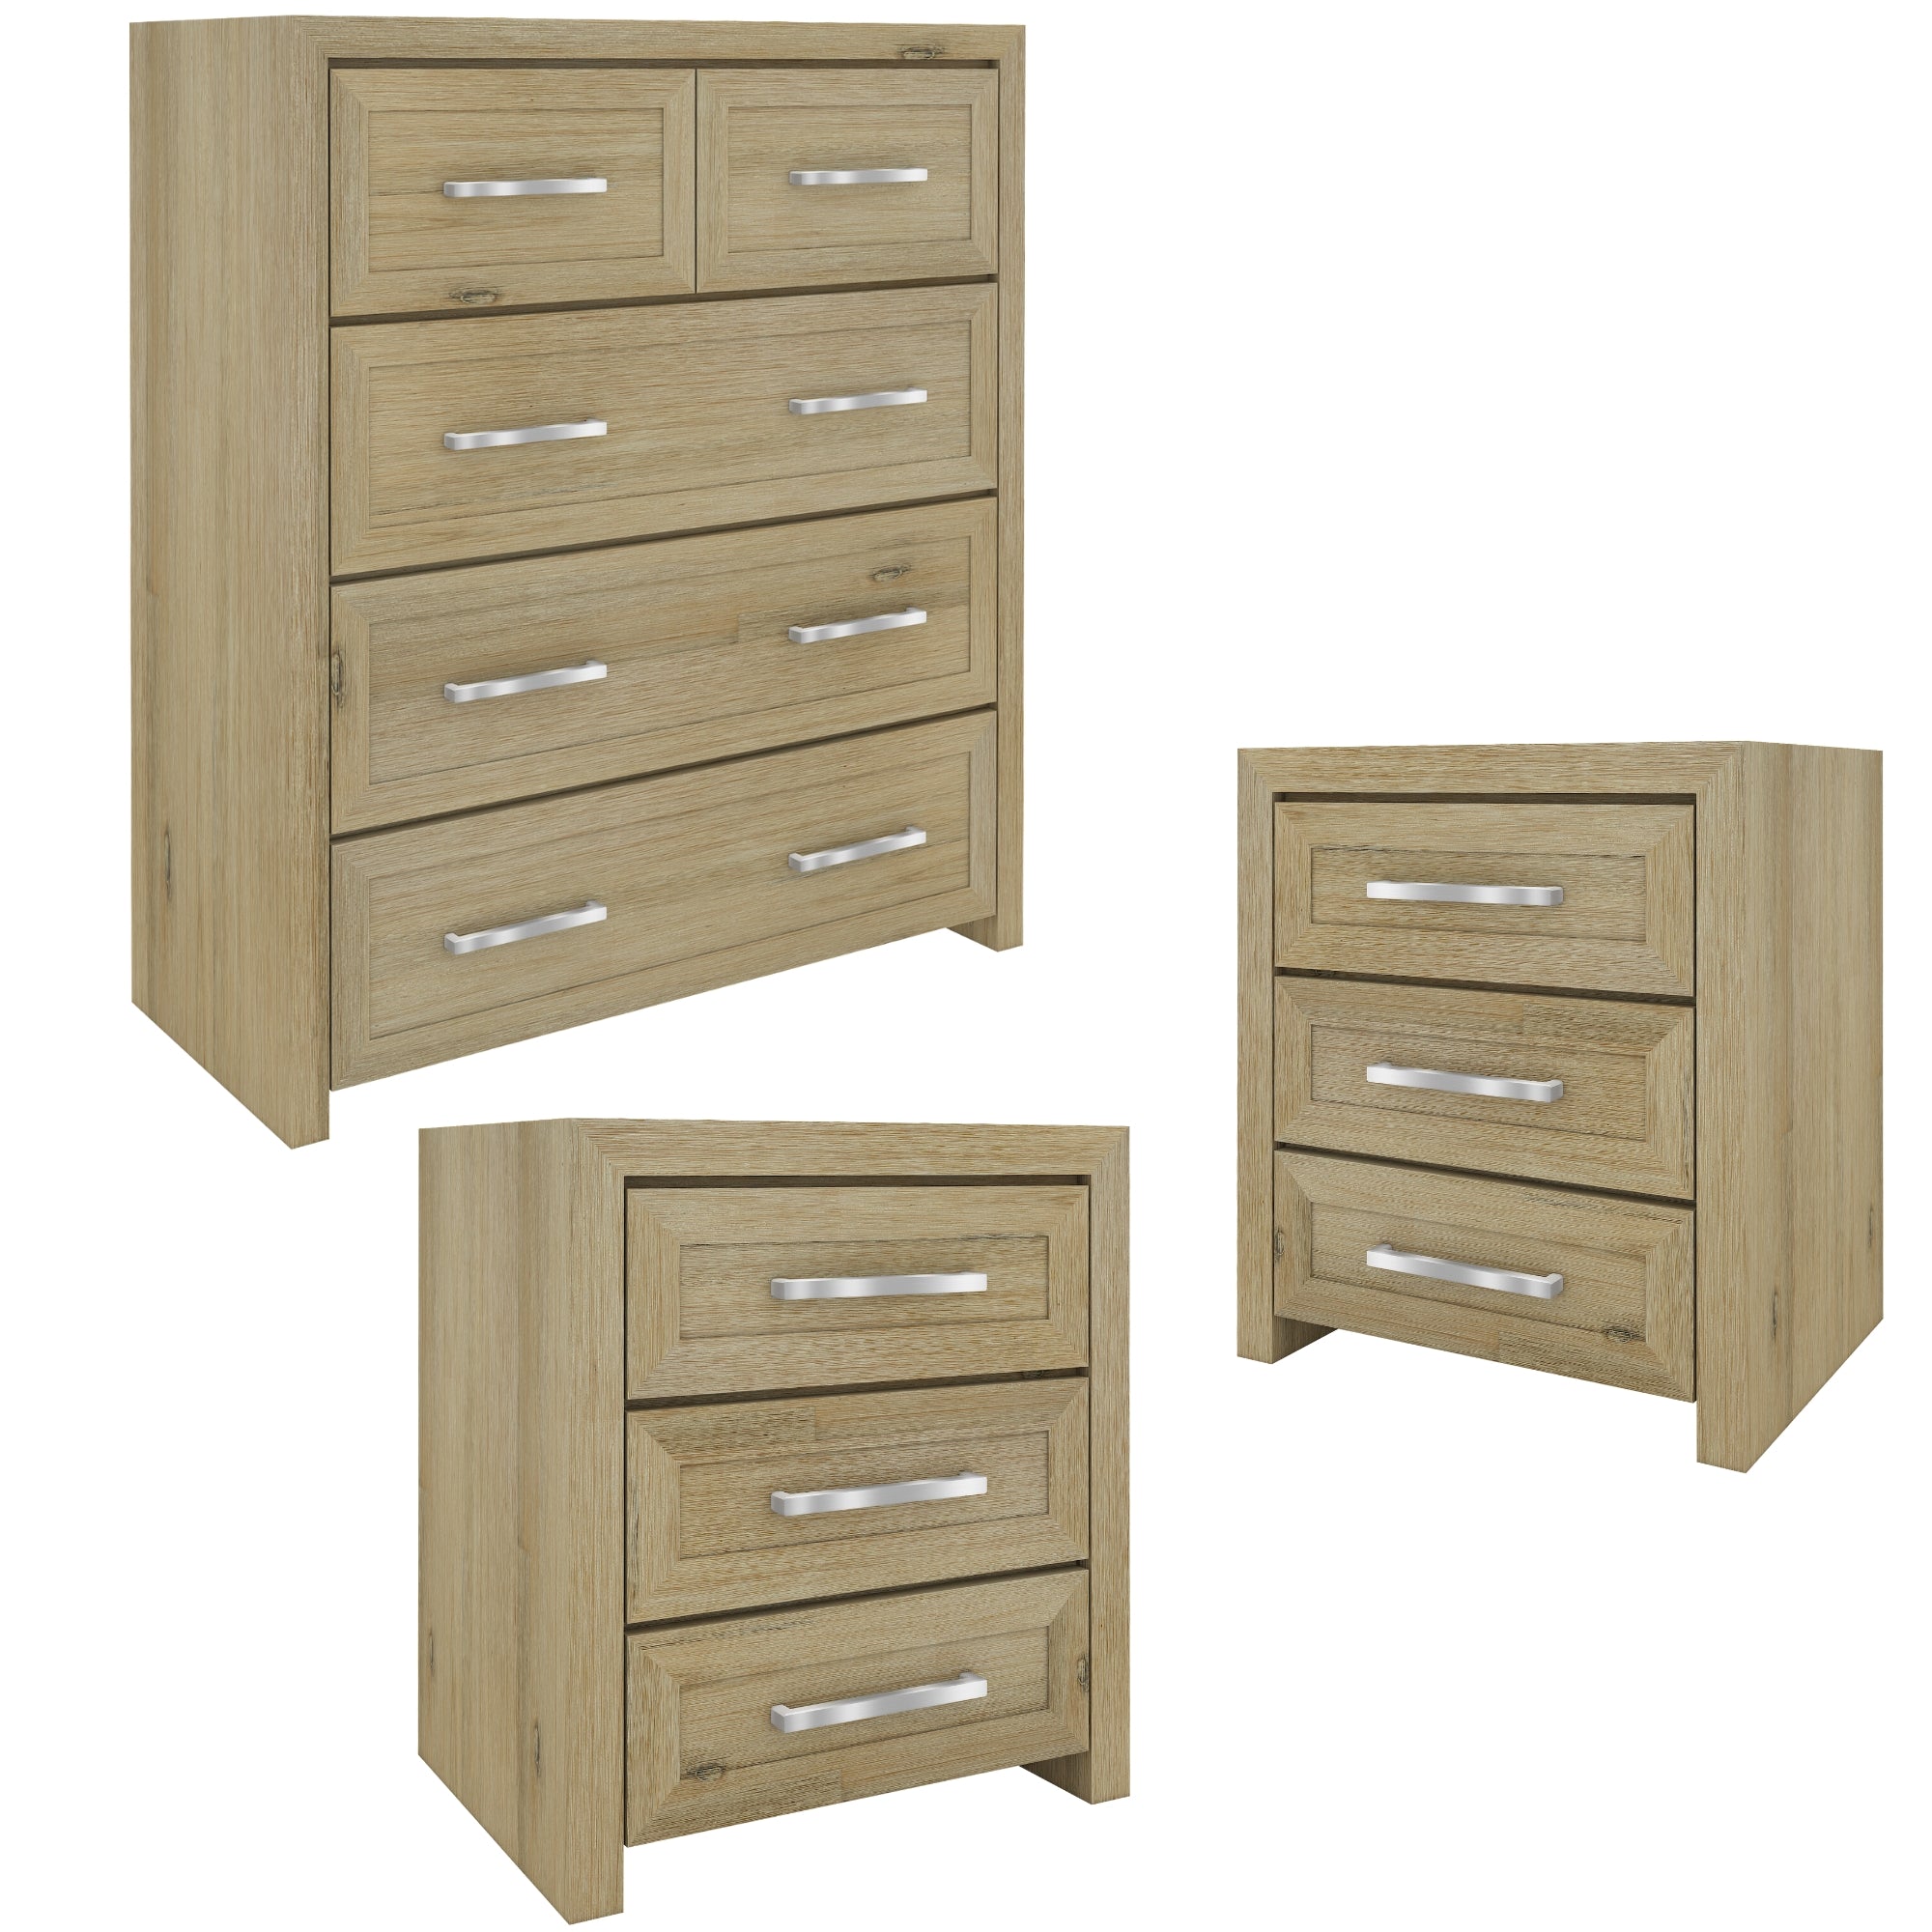 No Assembly Required! Set of Two Bedside Tables and Tallboy - Smoke